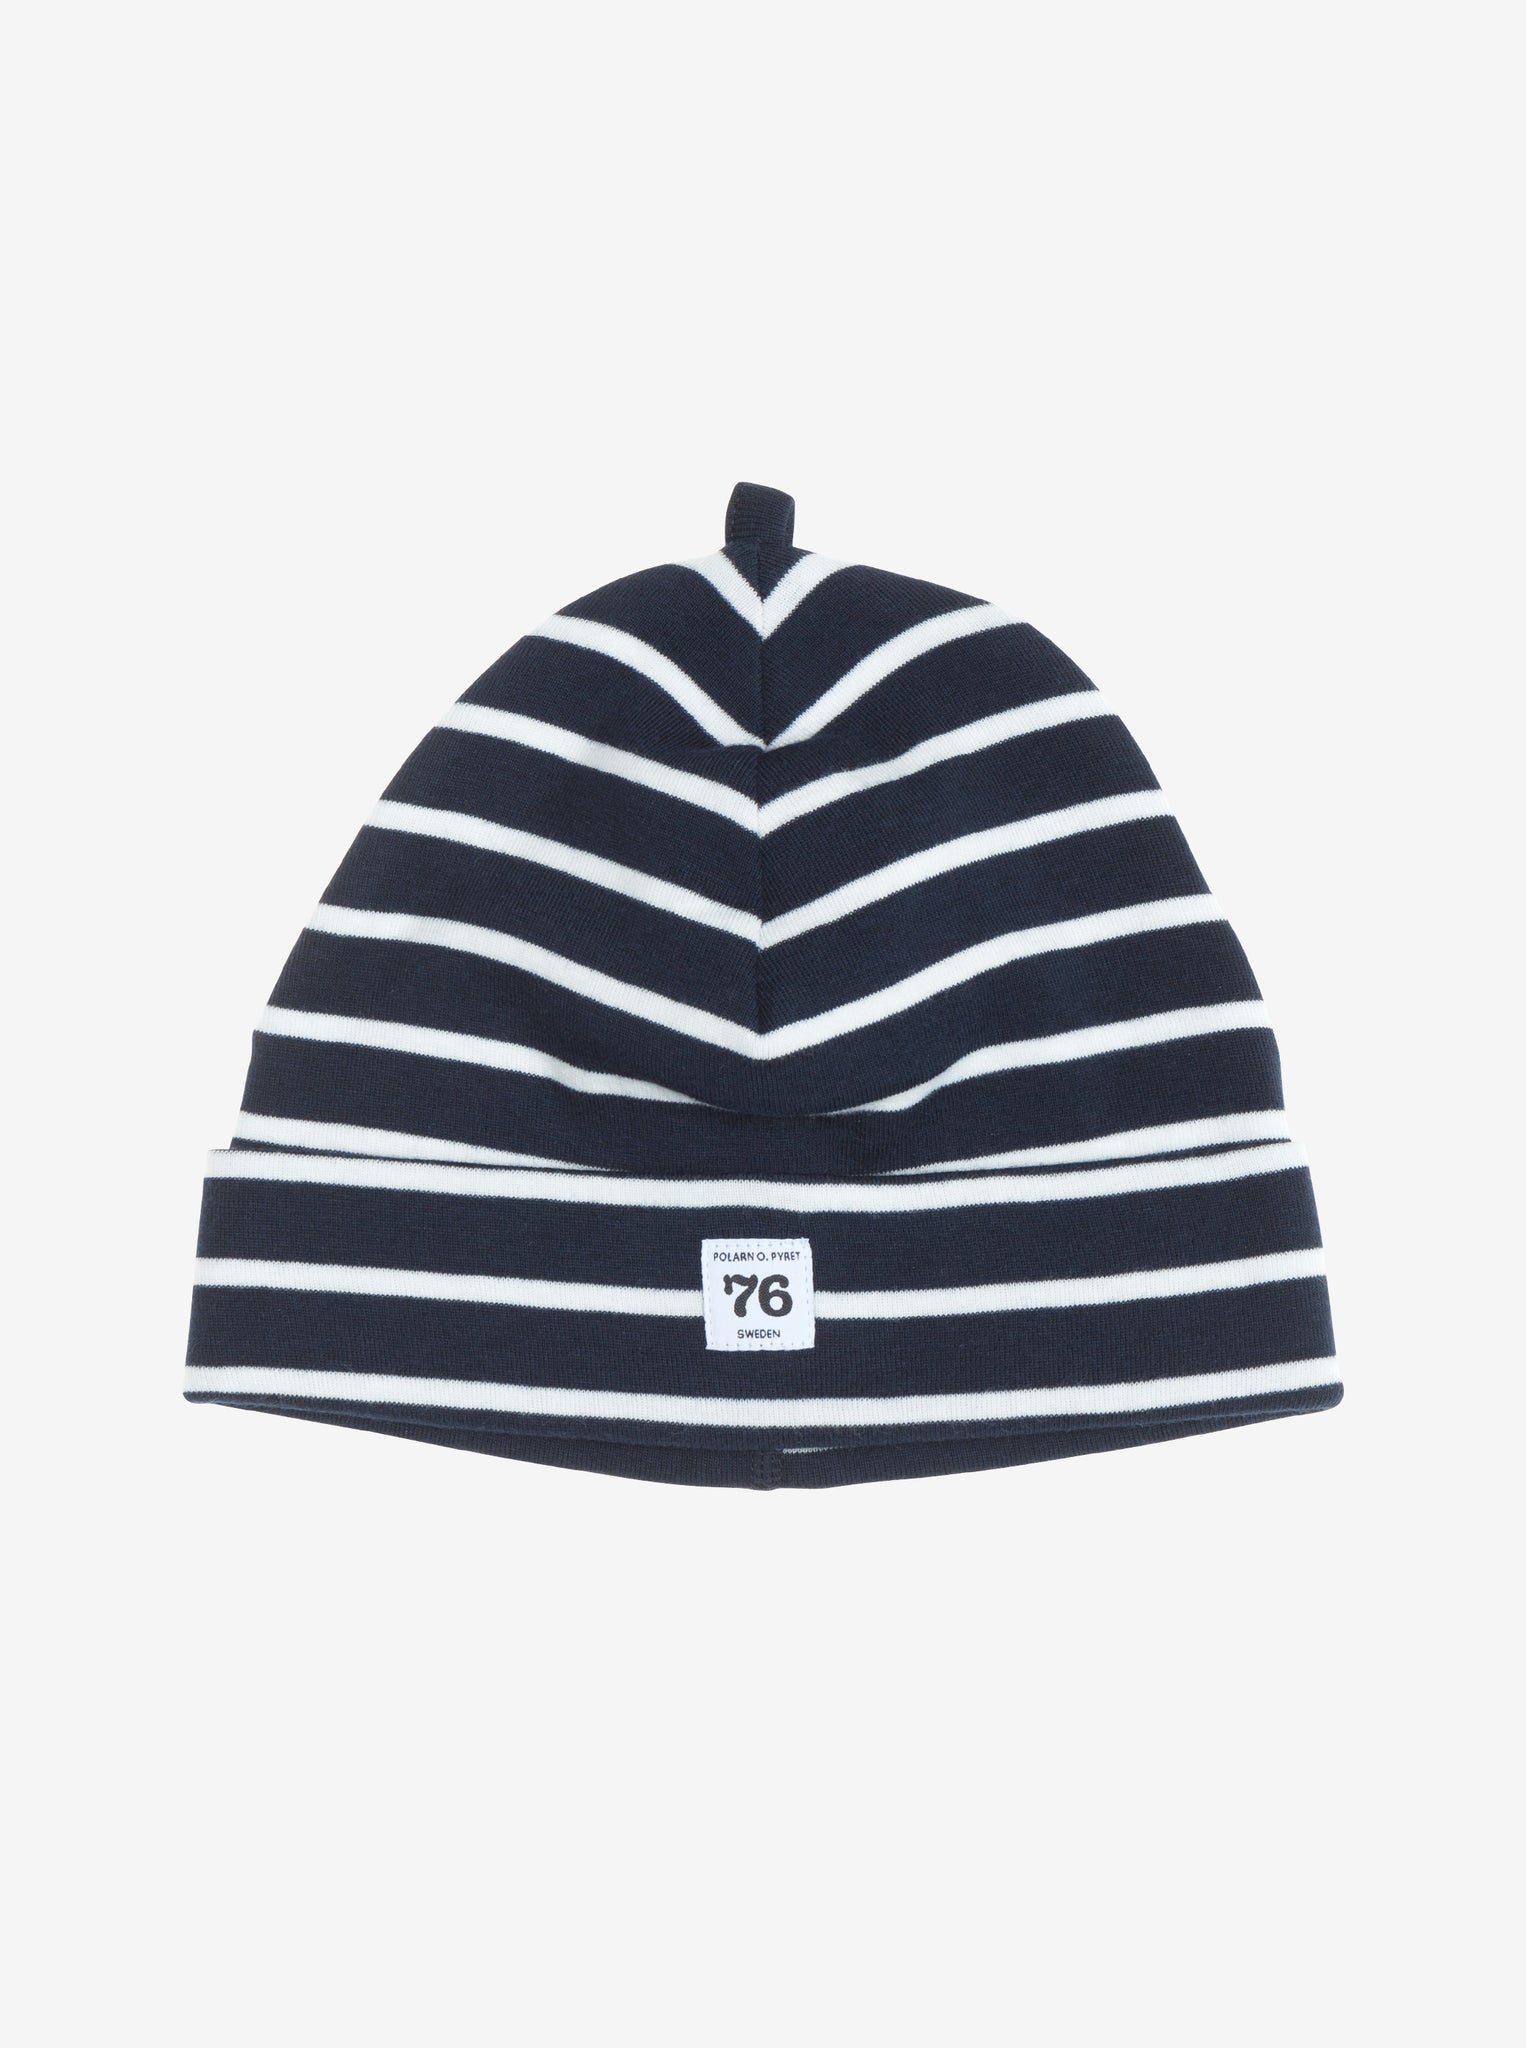 PO.P classic baby hat in white and navy